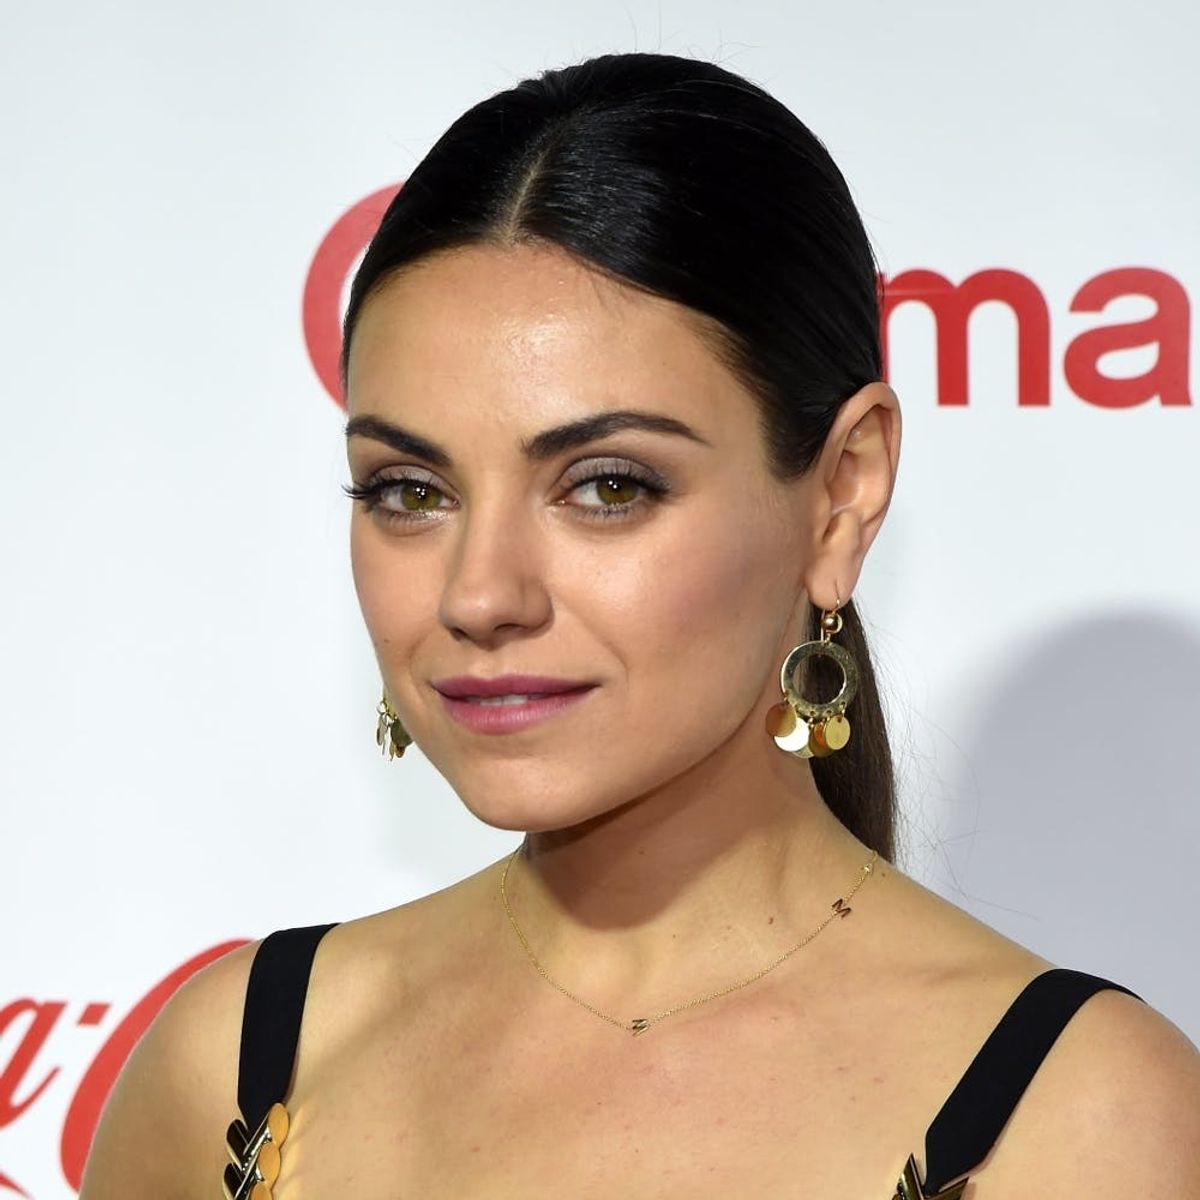 Mila Kunis Reveals Why She Fears a “Demon Baby”